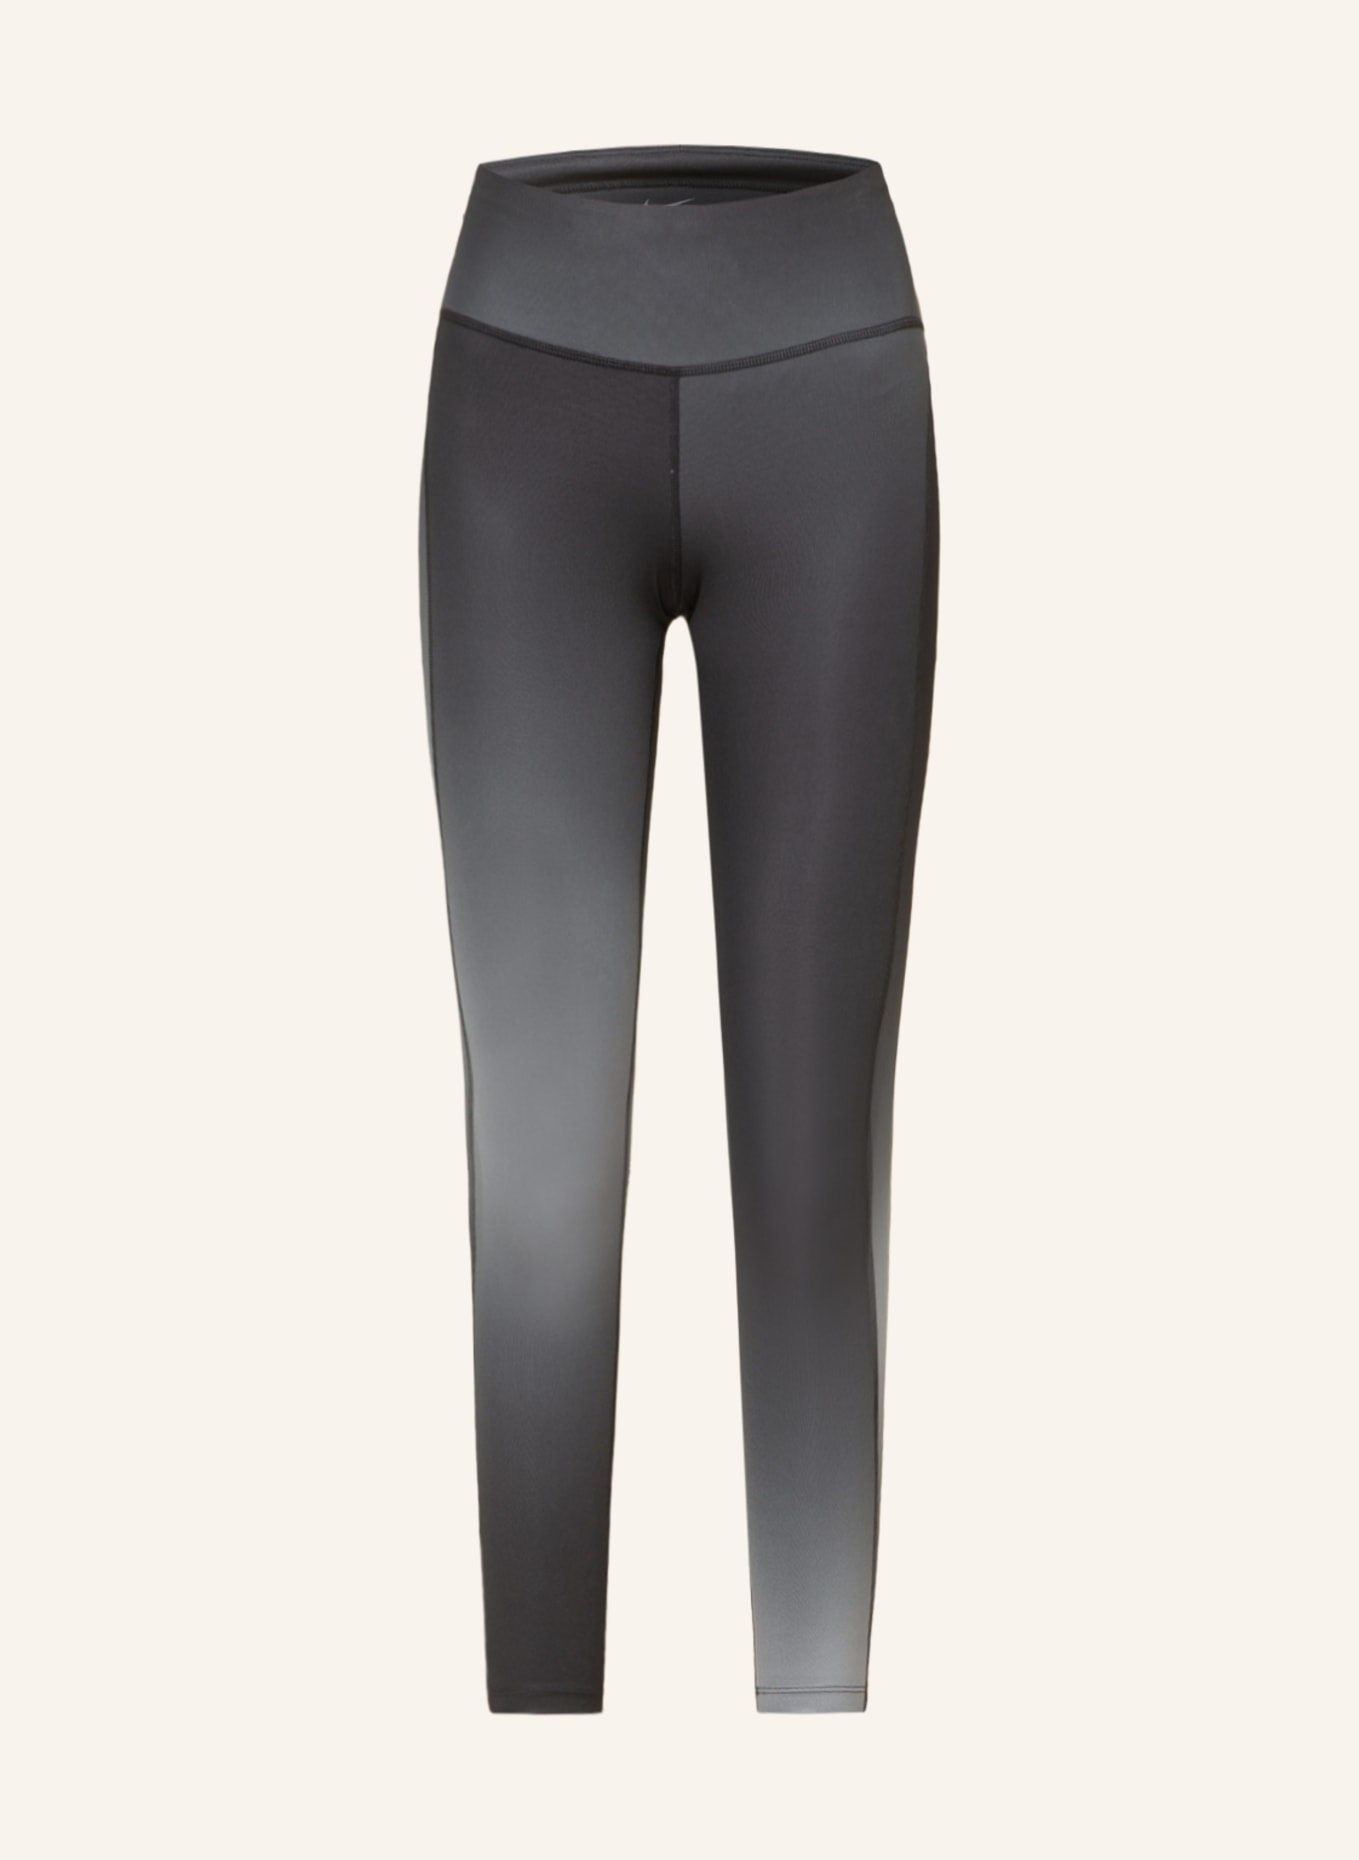 Nike Running tights FAST in black/ silver